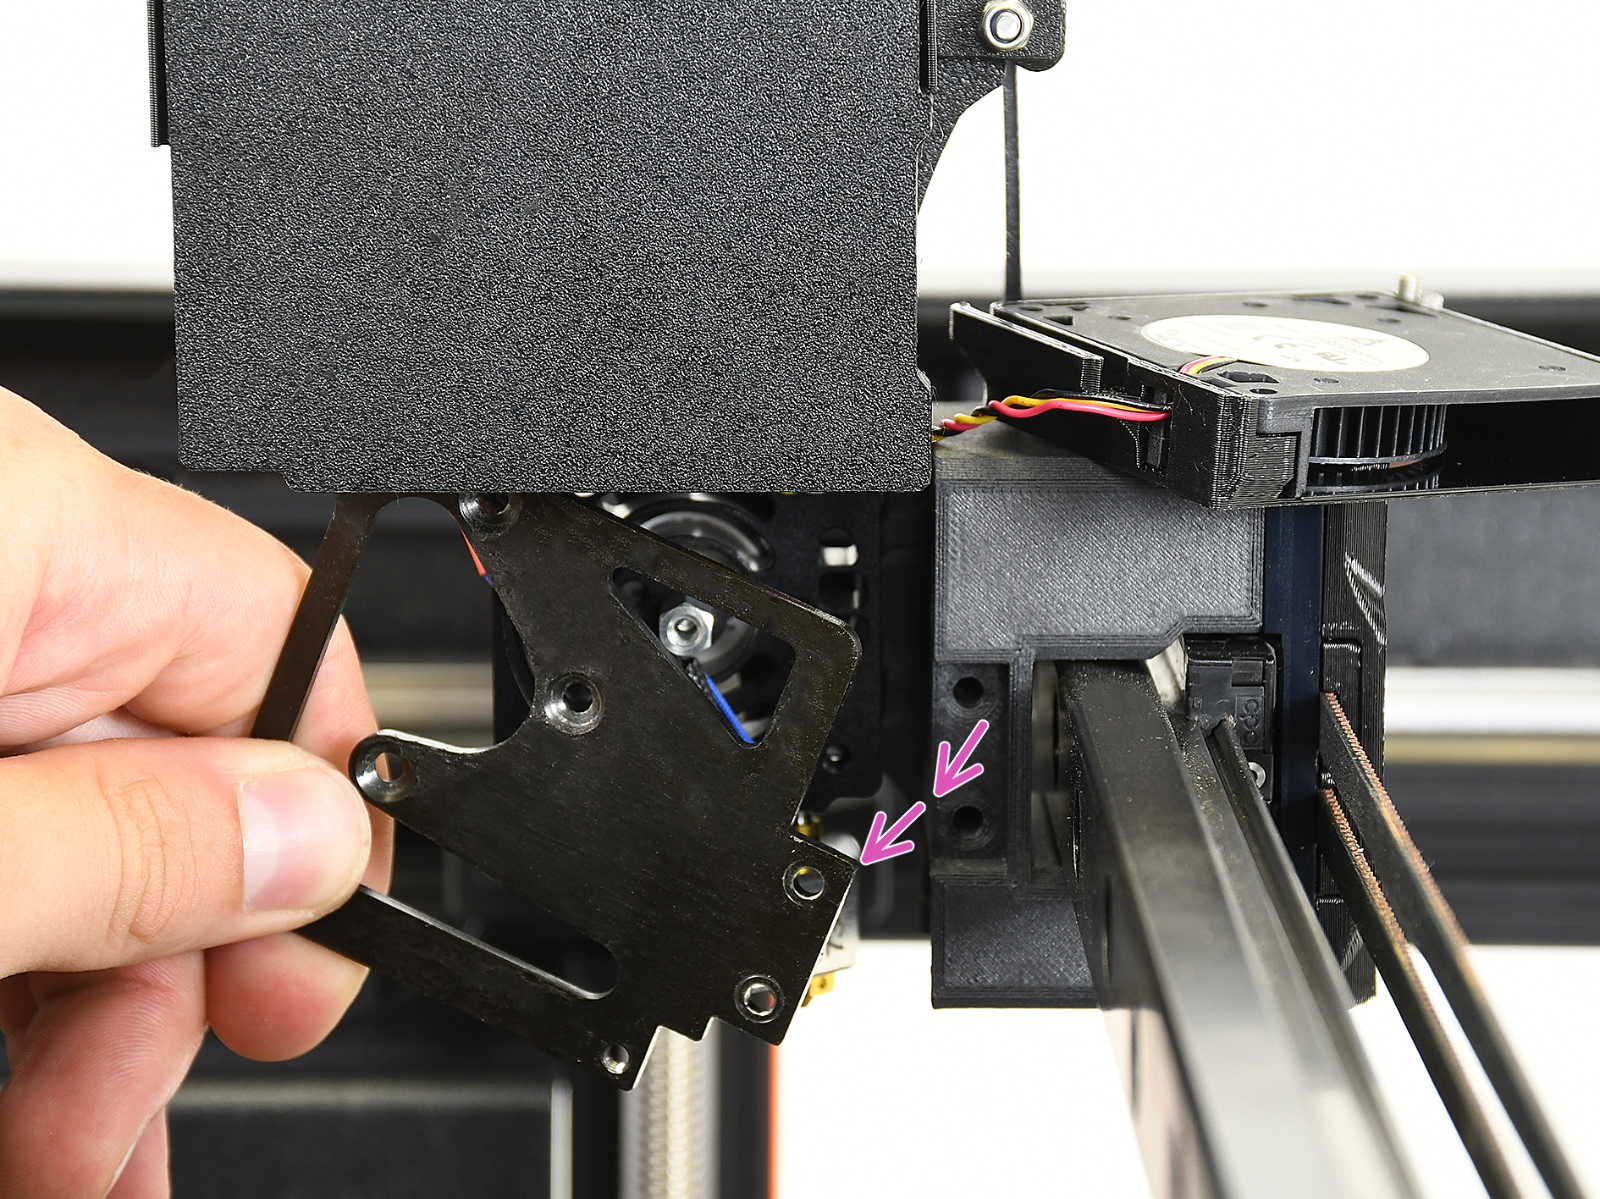 Removing the print fan